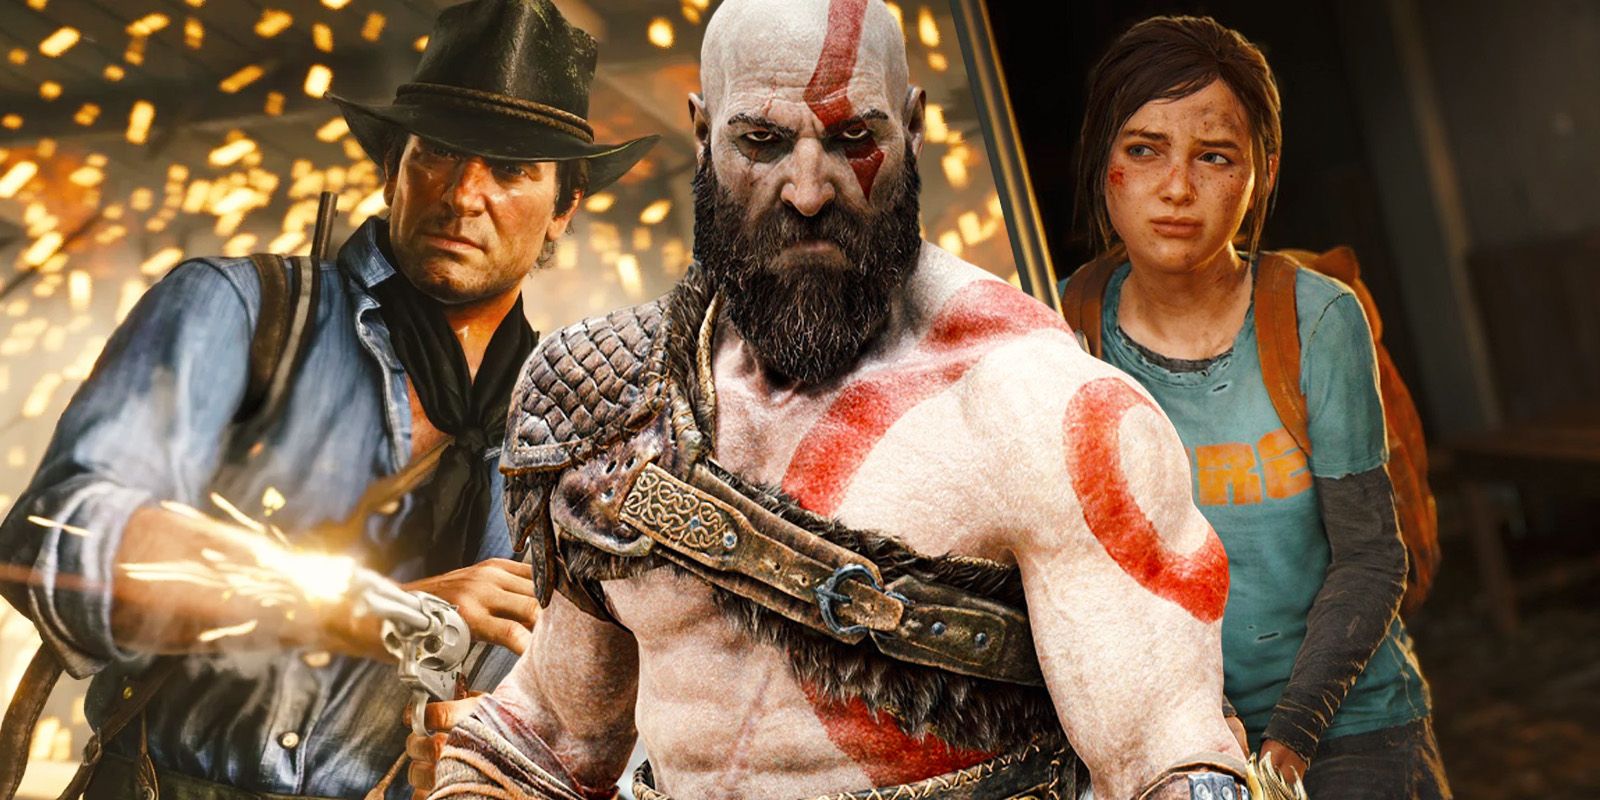 Arthur Morgan from RDR2, Kratos from God of War 2018 and Ellie from The Last of Us Part 1.